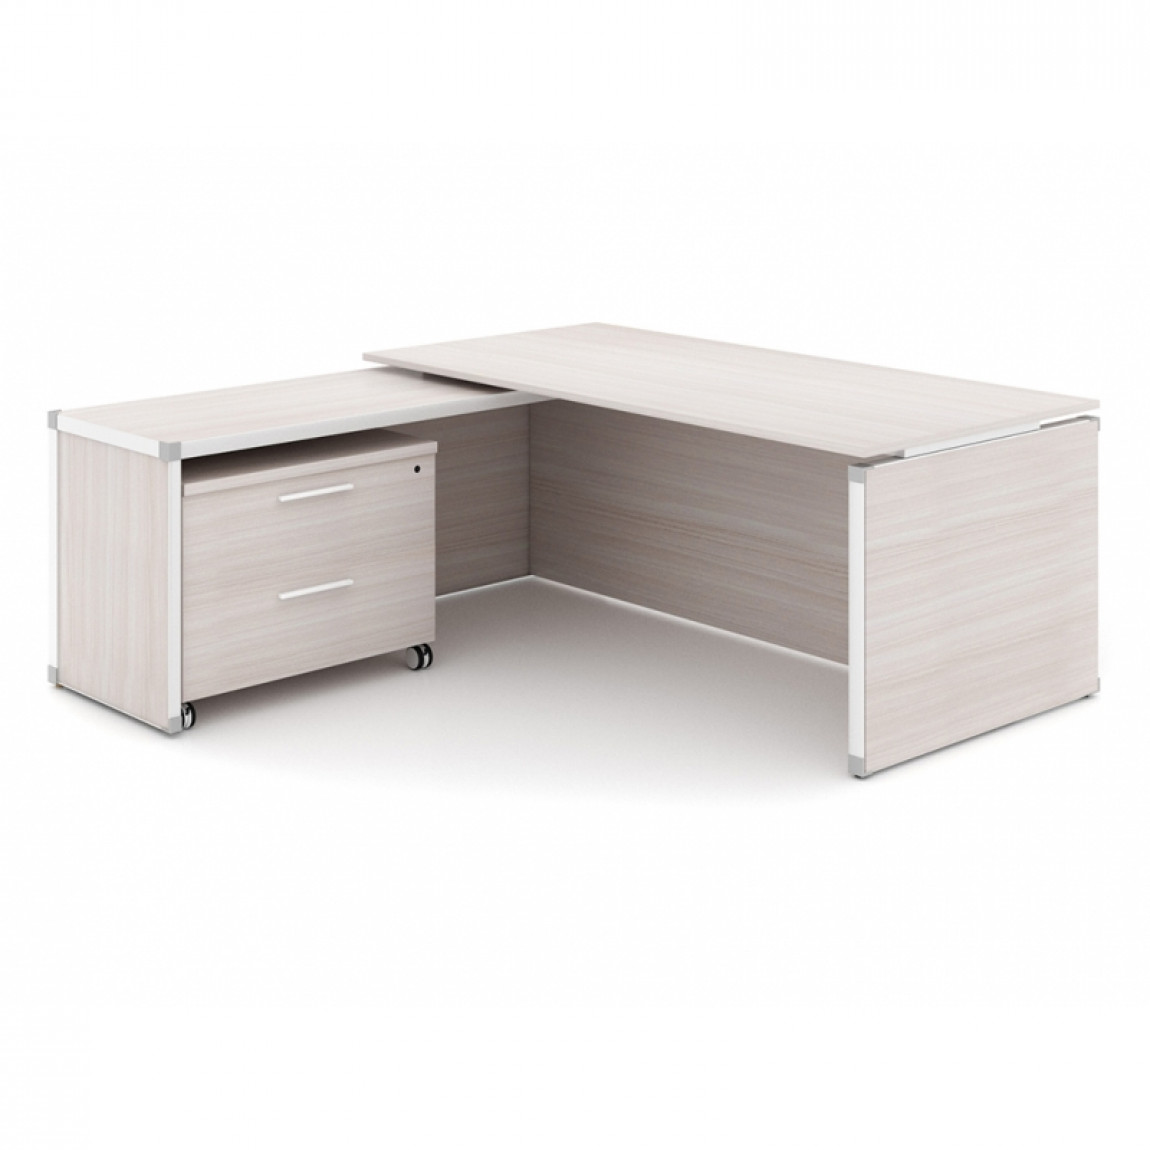 https://www.michalsenofficefurniture.com/wp-content/uploads/2022/04/8916-executive-l-shaped-desk-with-drawers-1.jpg